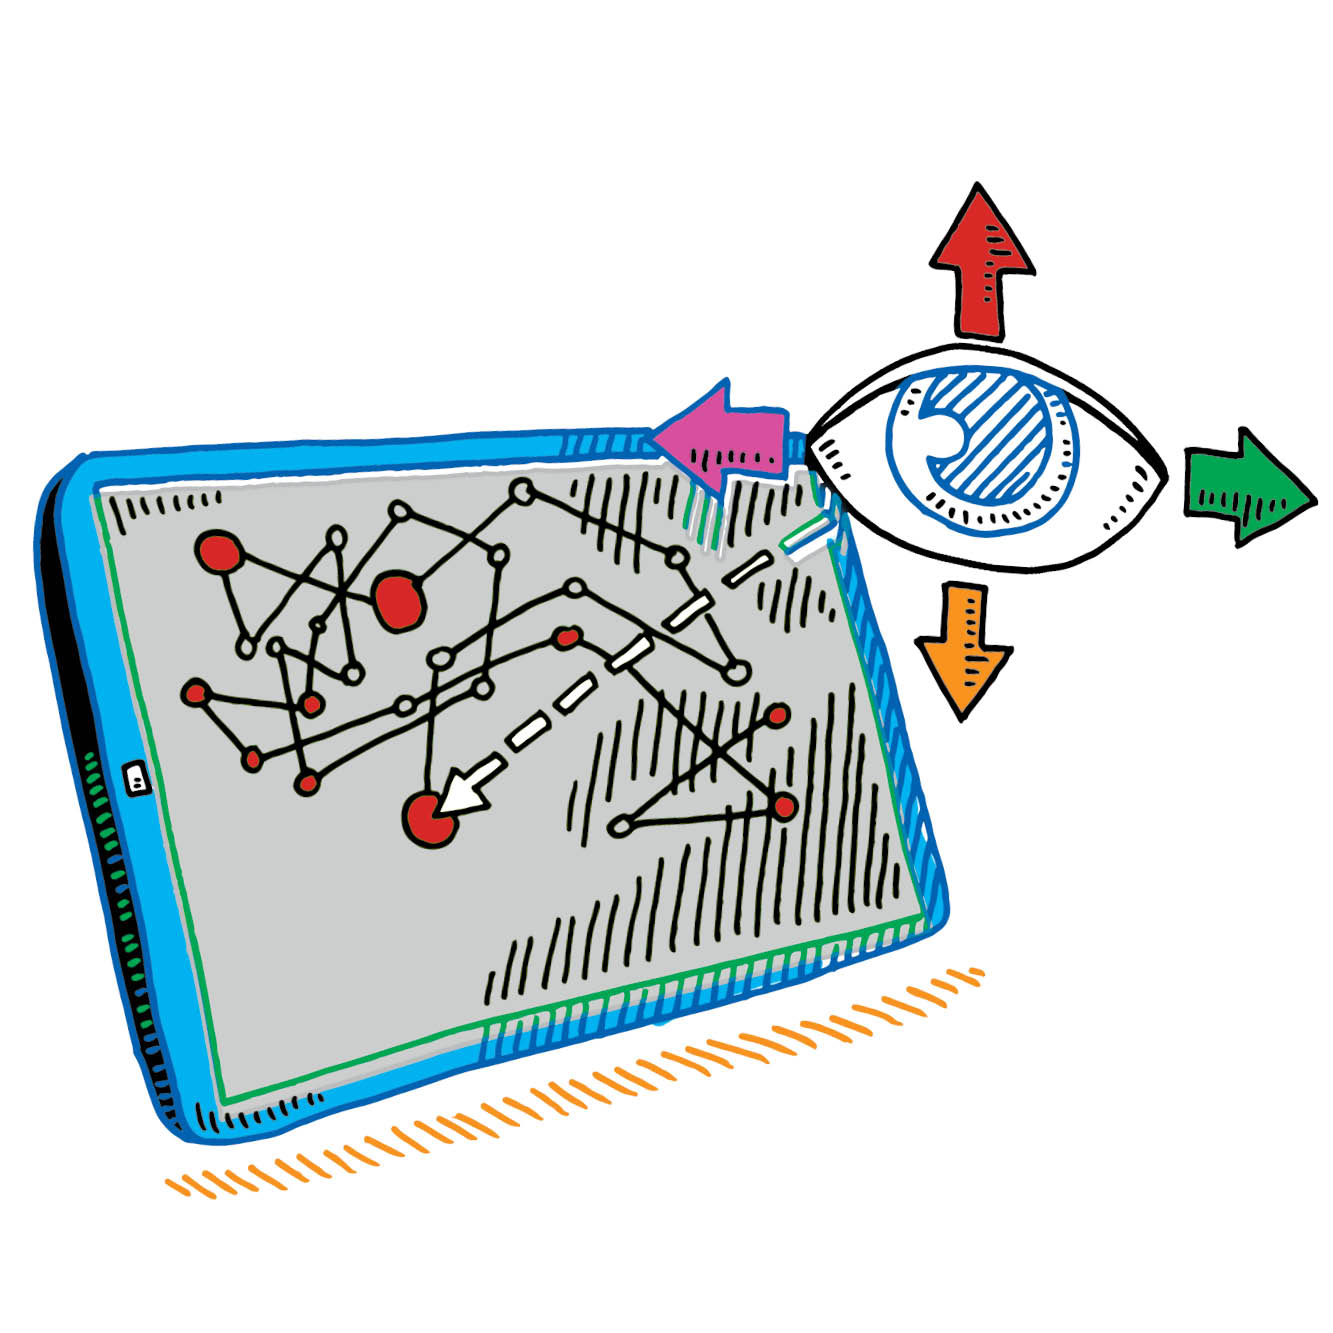 Illustration of an eye with arrows pointing in all directions in front of a tablet displaying a diagram